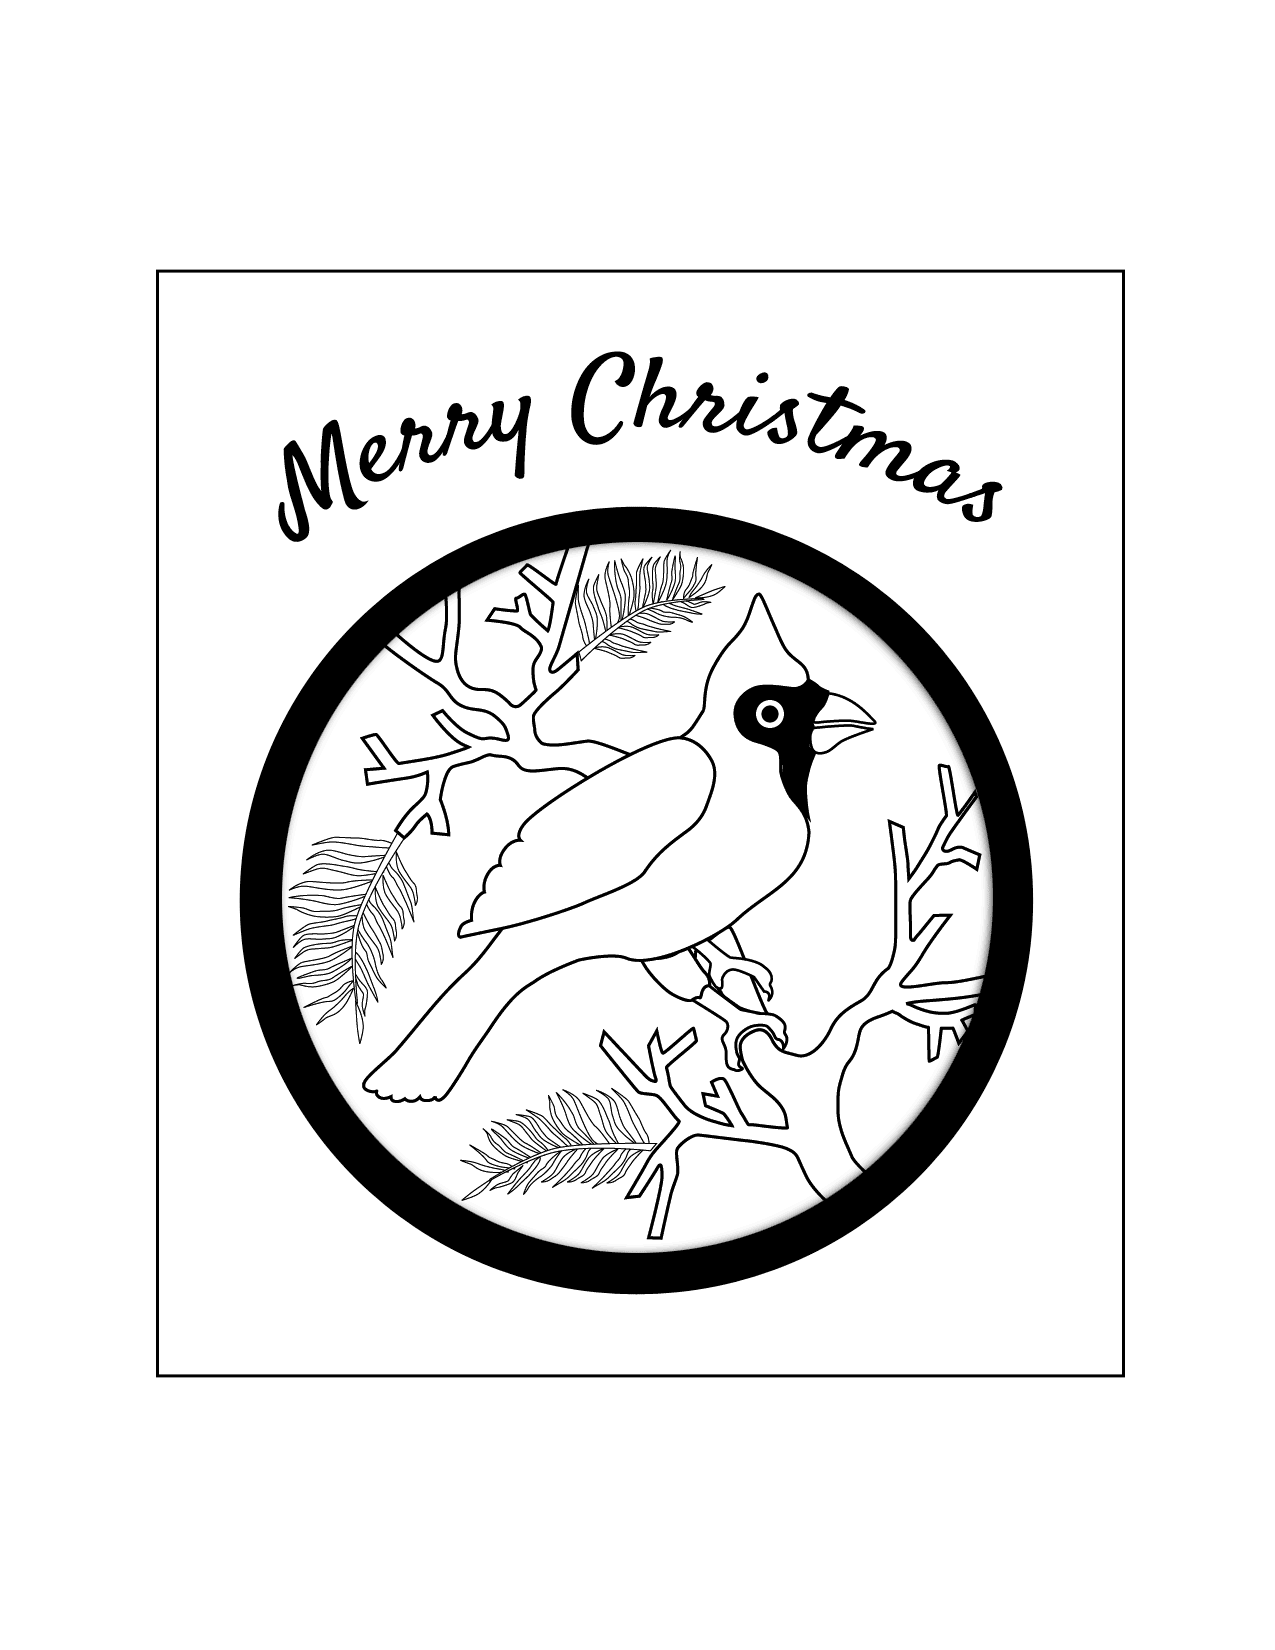 Merry Christmas Cardinal Coloring Page